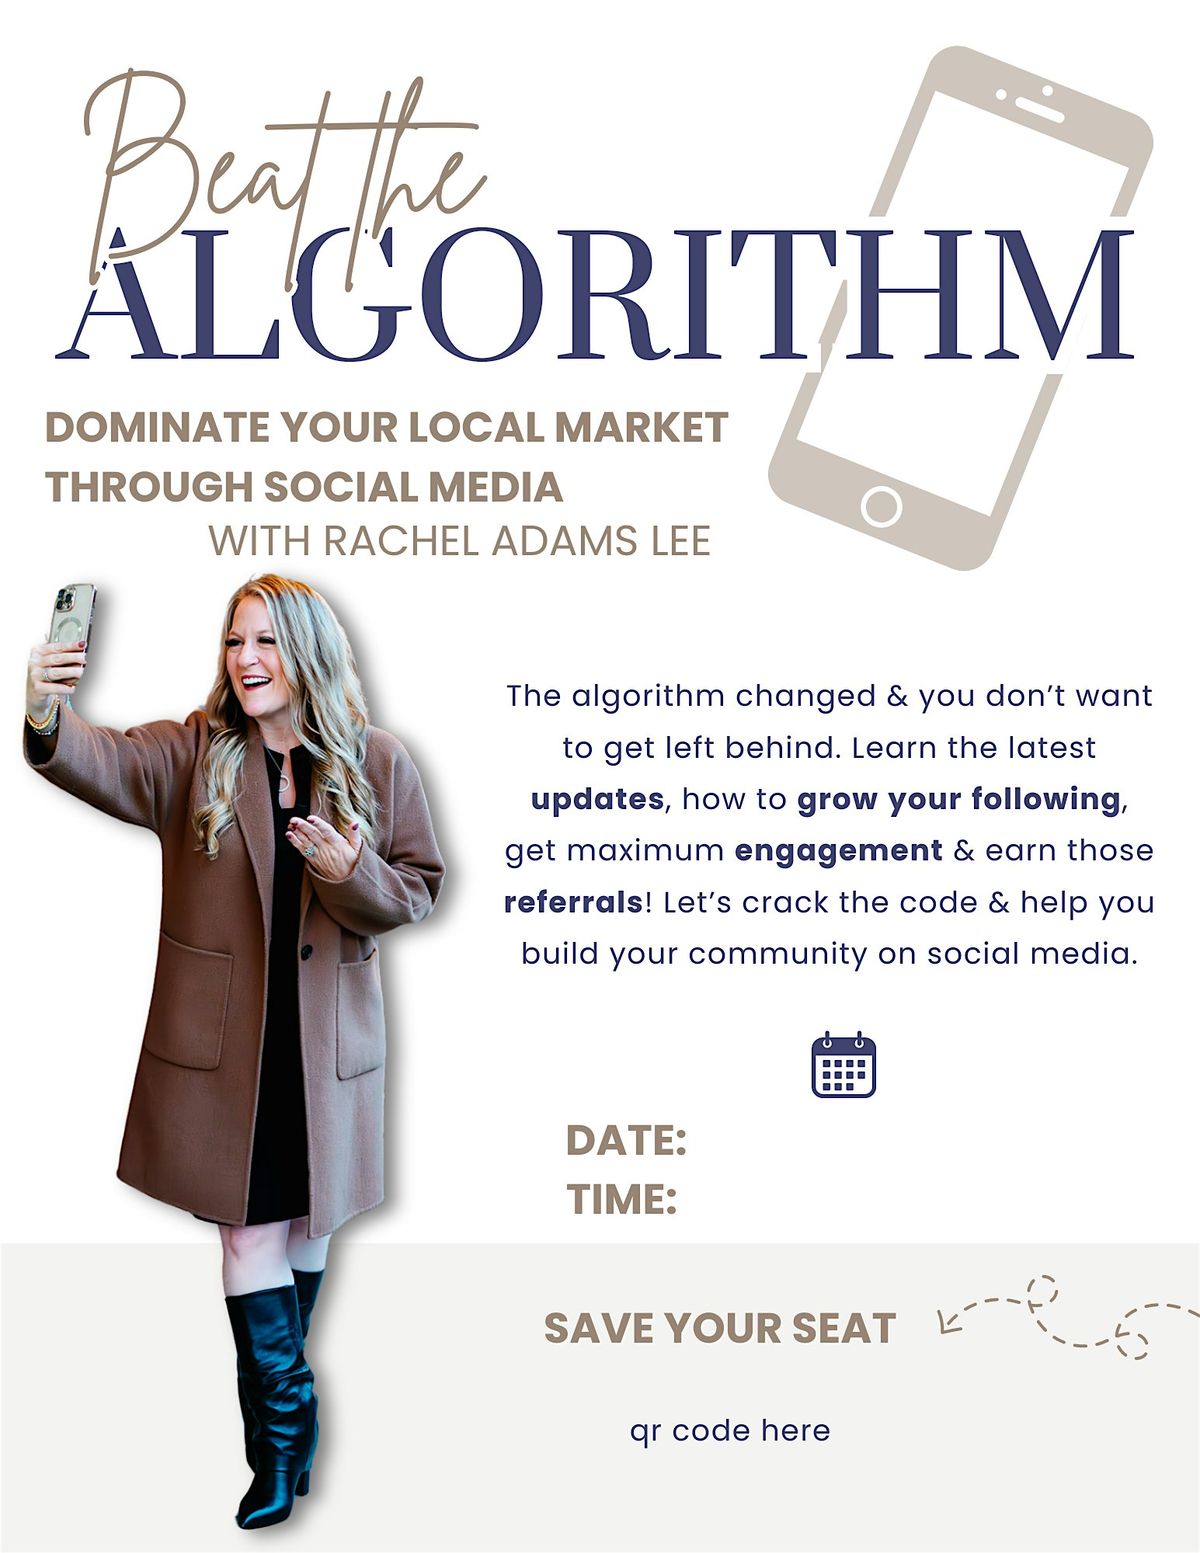 Beat the Algorithm - Dominate Your Market with Social Media